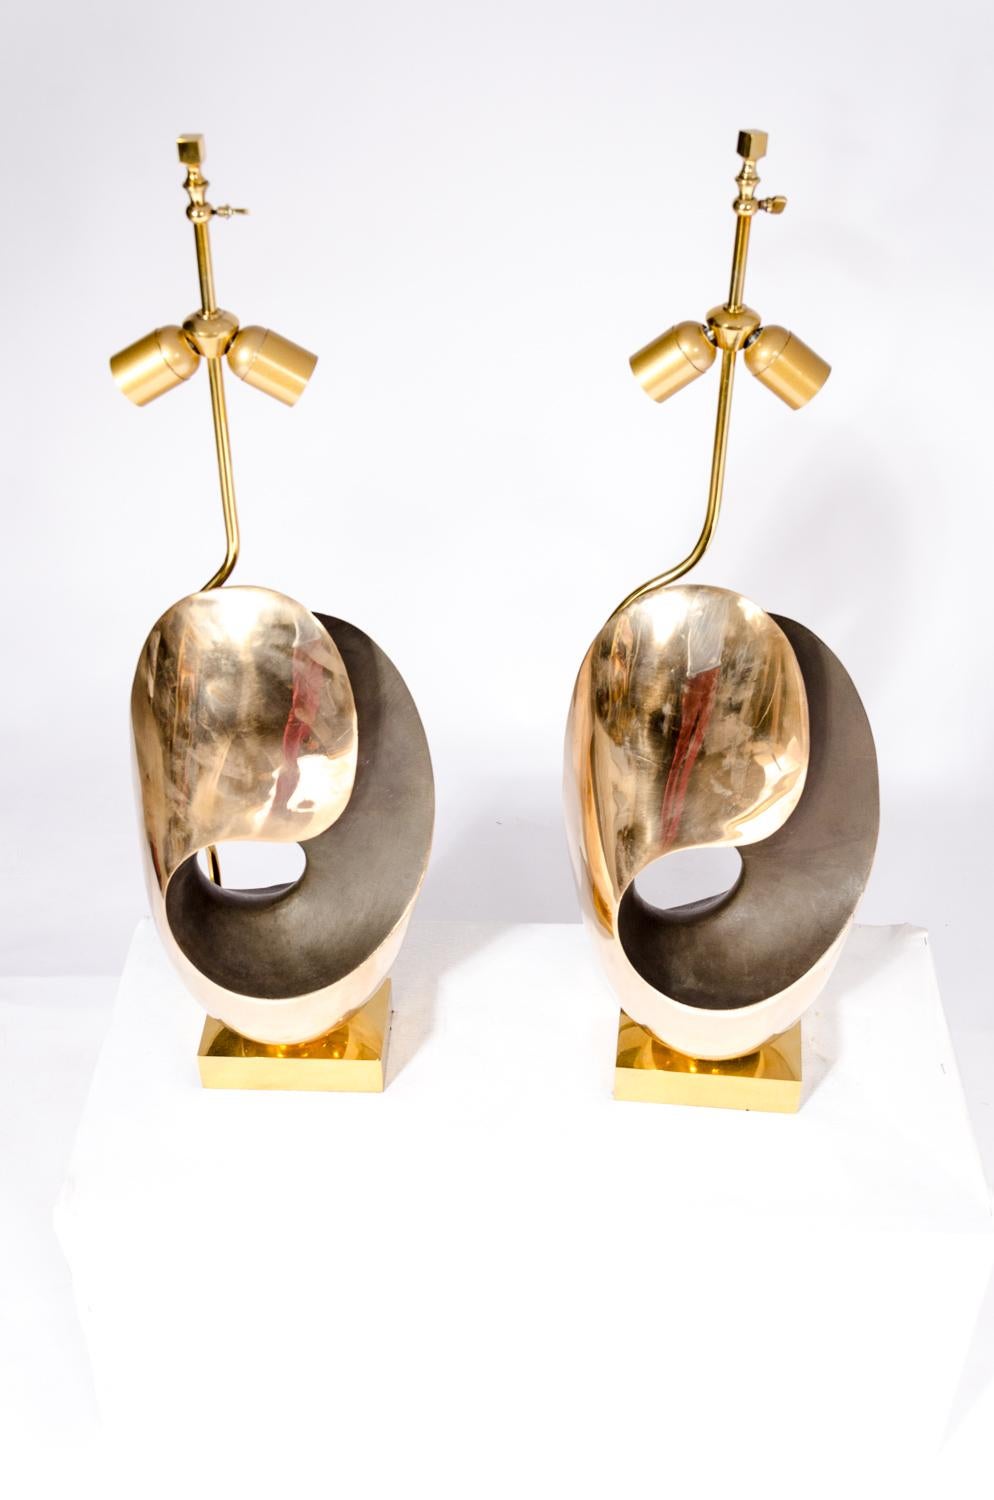 From the seventies comes this pair of table lamps in Bronze and brass inthe style of Willy Daro. The lamps received new electric al wires according to the latest safety standards.